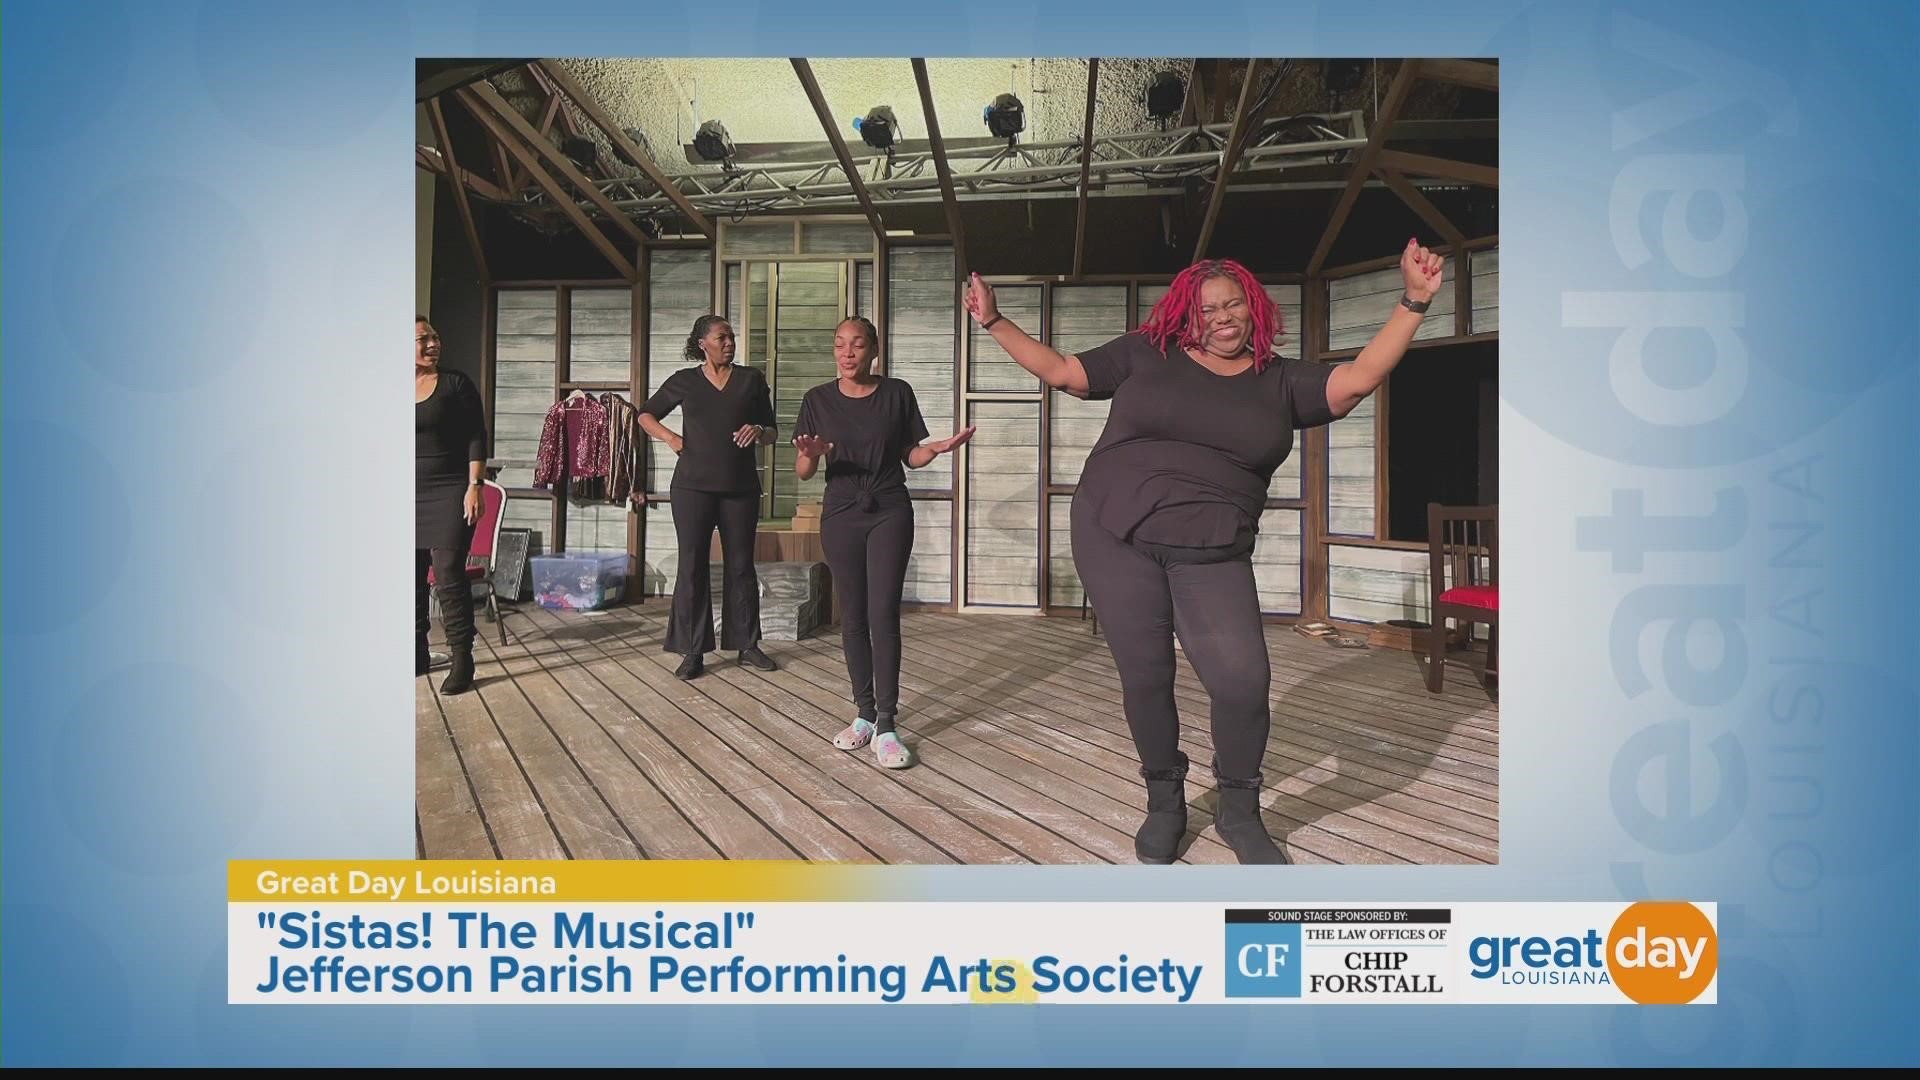 We get a look at the latest production from Jefferson Performing Arts Society, "Sistas! The Musical."